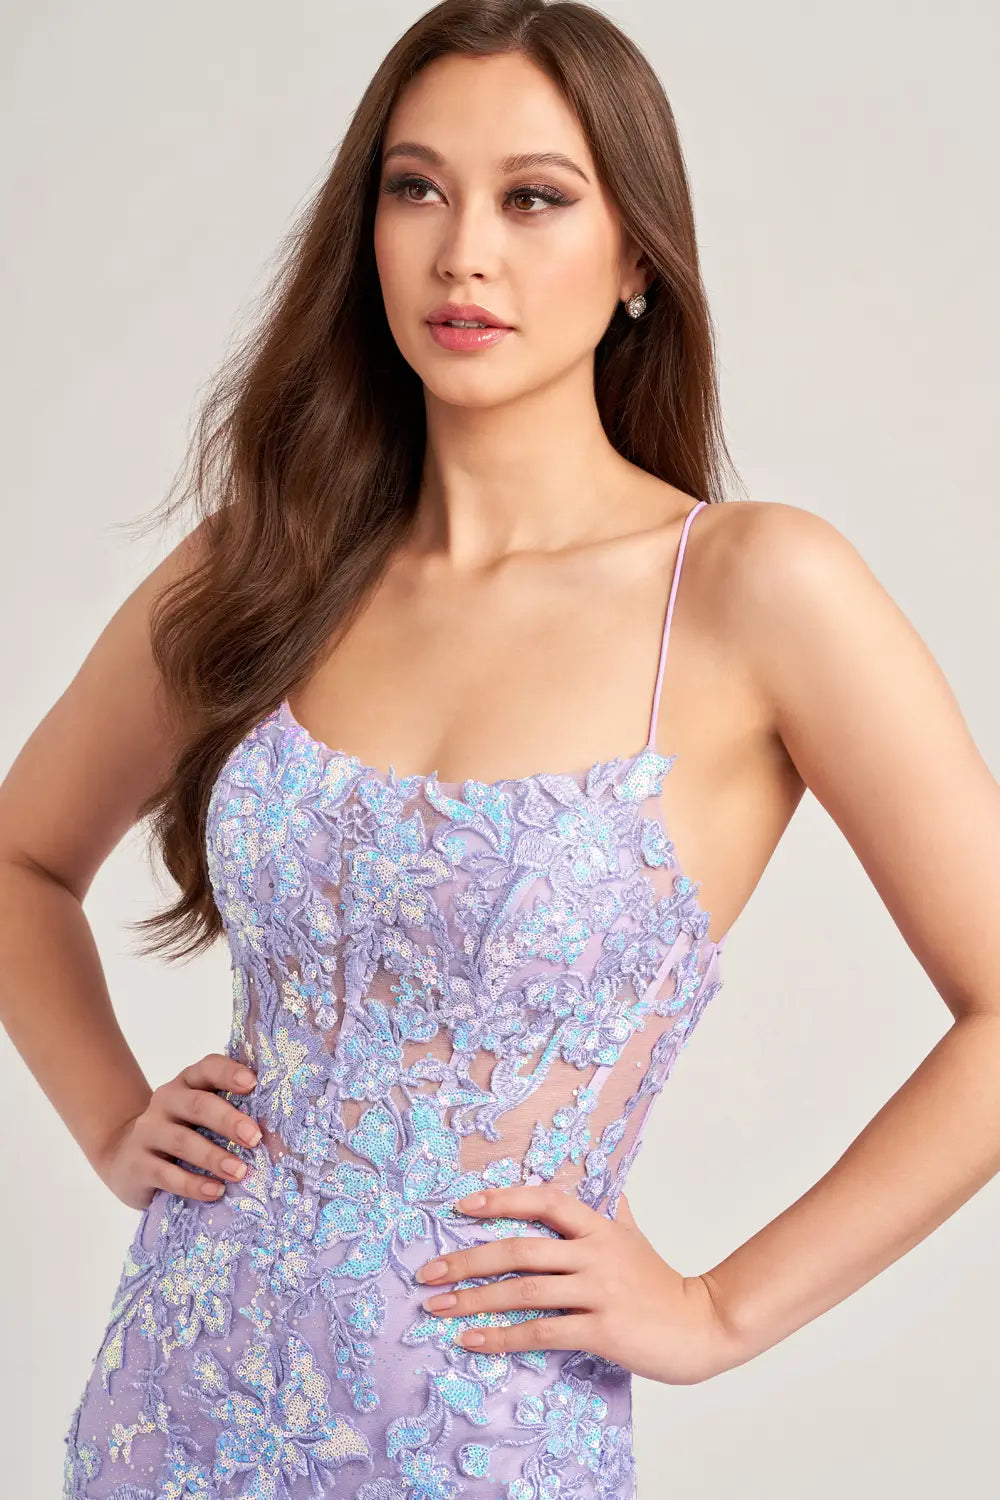 Elevate your prom look with the Ellie Wilde EW35057 dress. The sheer sequin lace corset adds a touch of elegance and the mermaid silhouette enhances your figure. With a daring slit and backless design, this dress is sure to make a statement. A scoop neck completes the look.   Sizes: 00-16  Colors: Lilac, Ice Blue